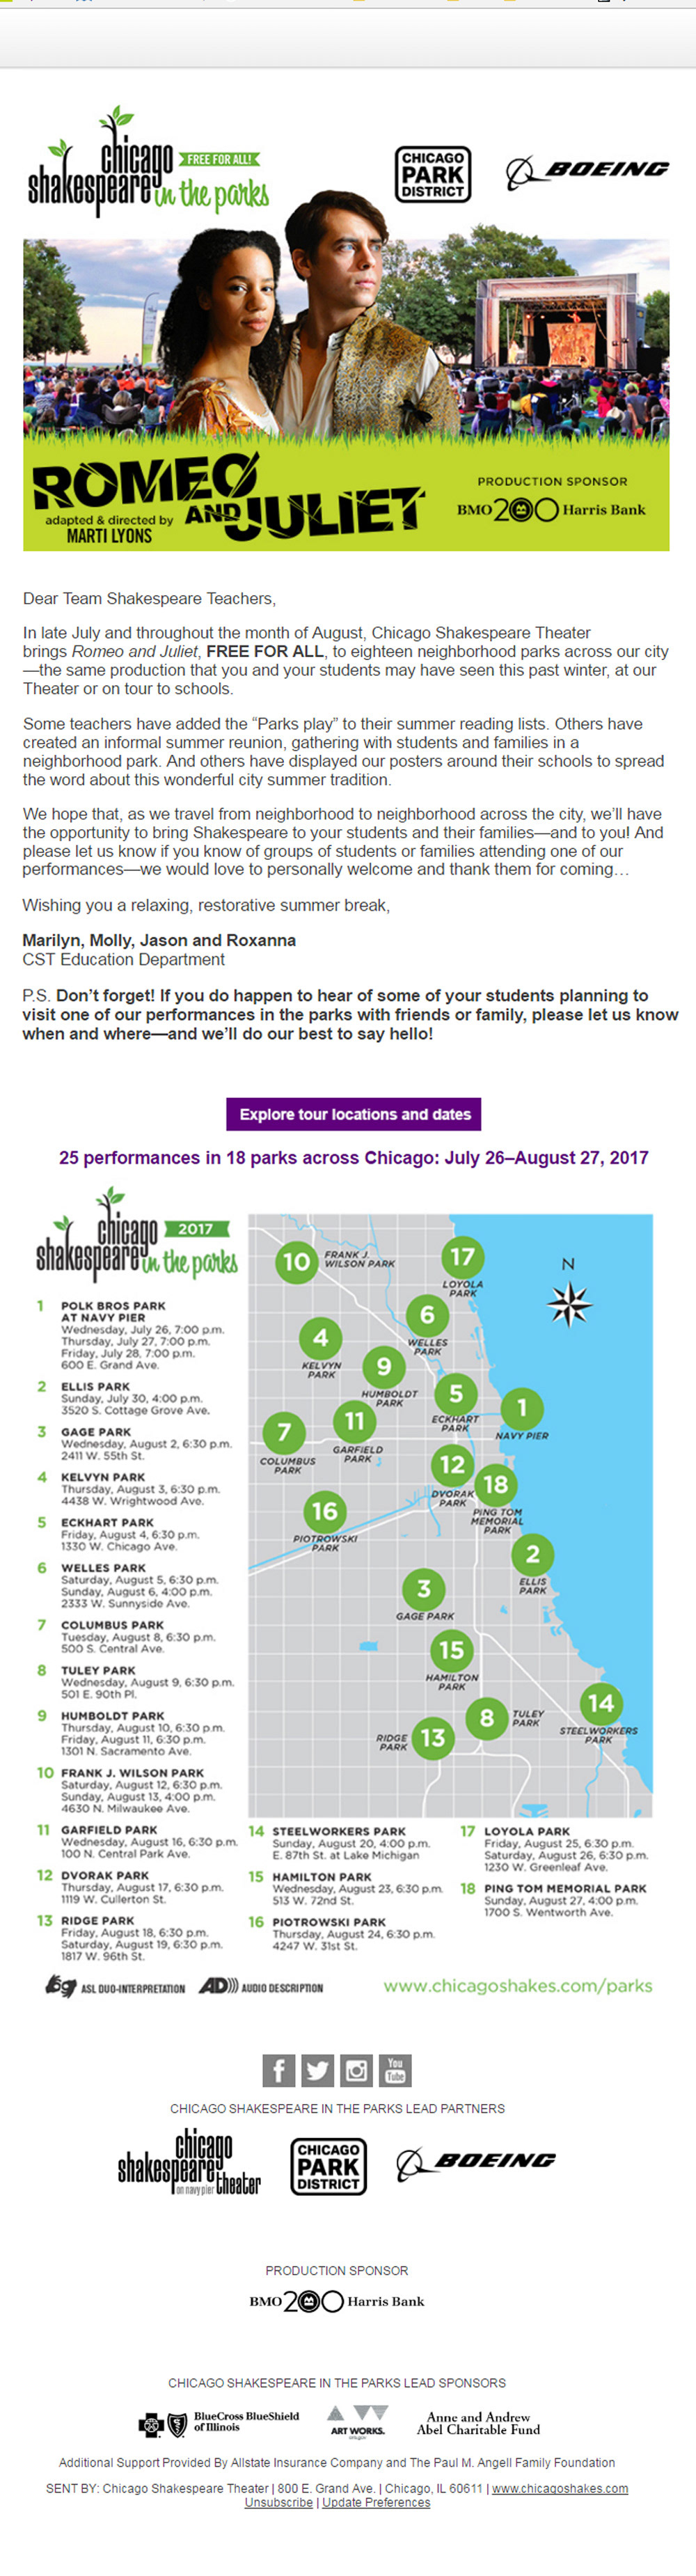 Chicago Shakespeare Theater: Parking & Directions